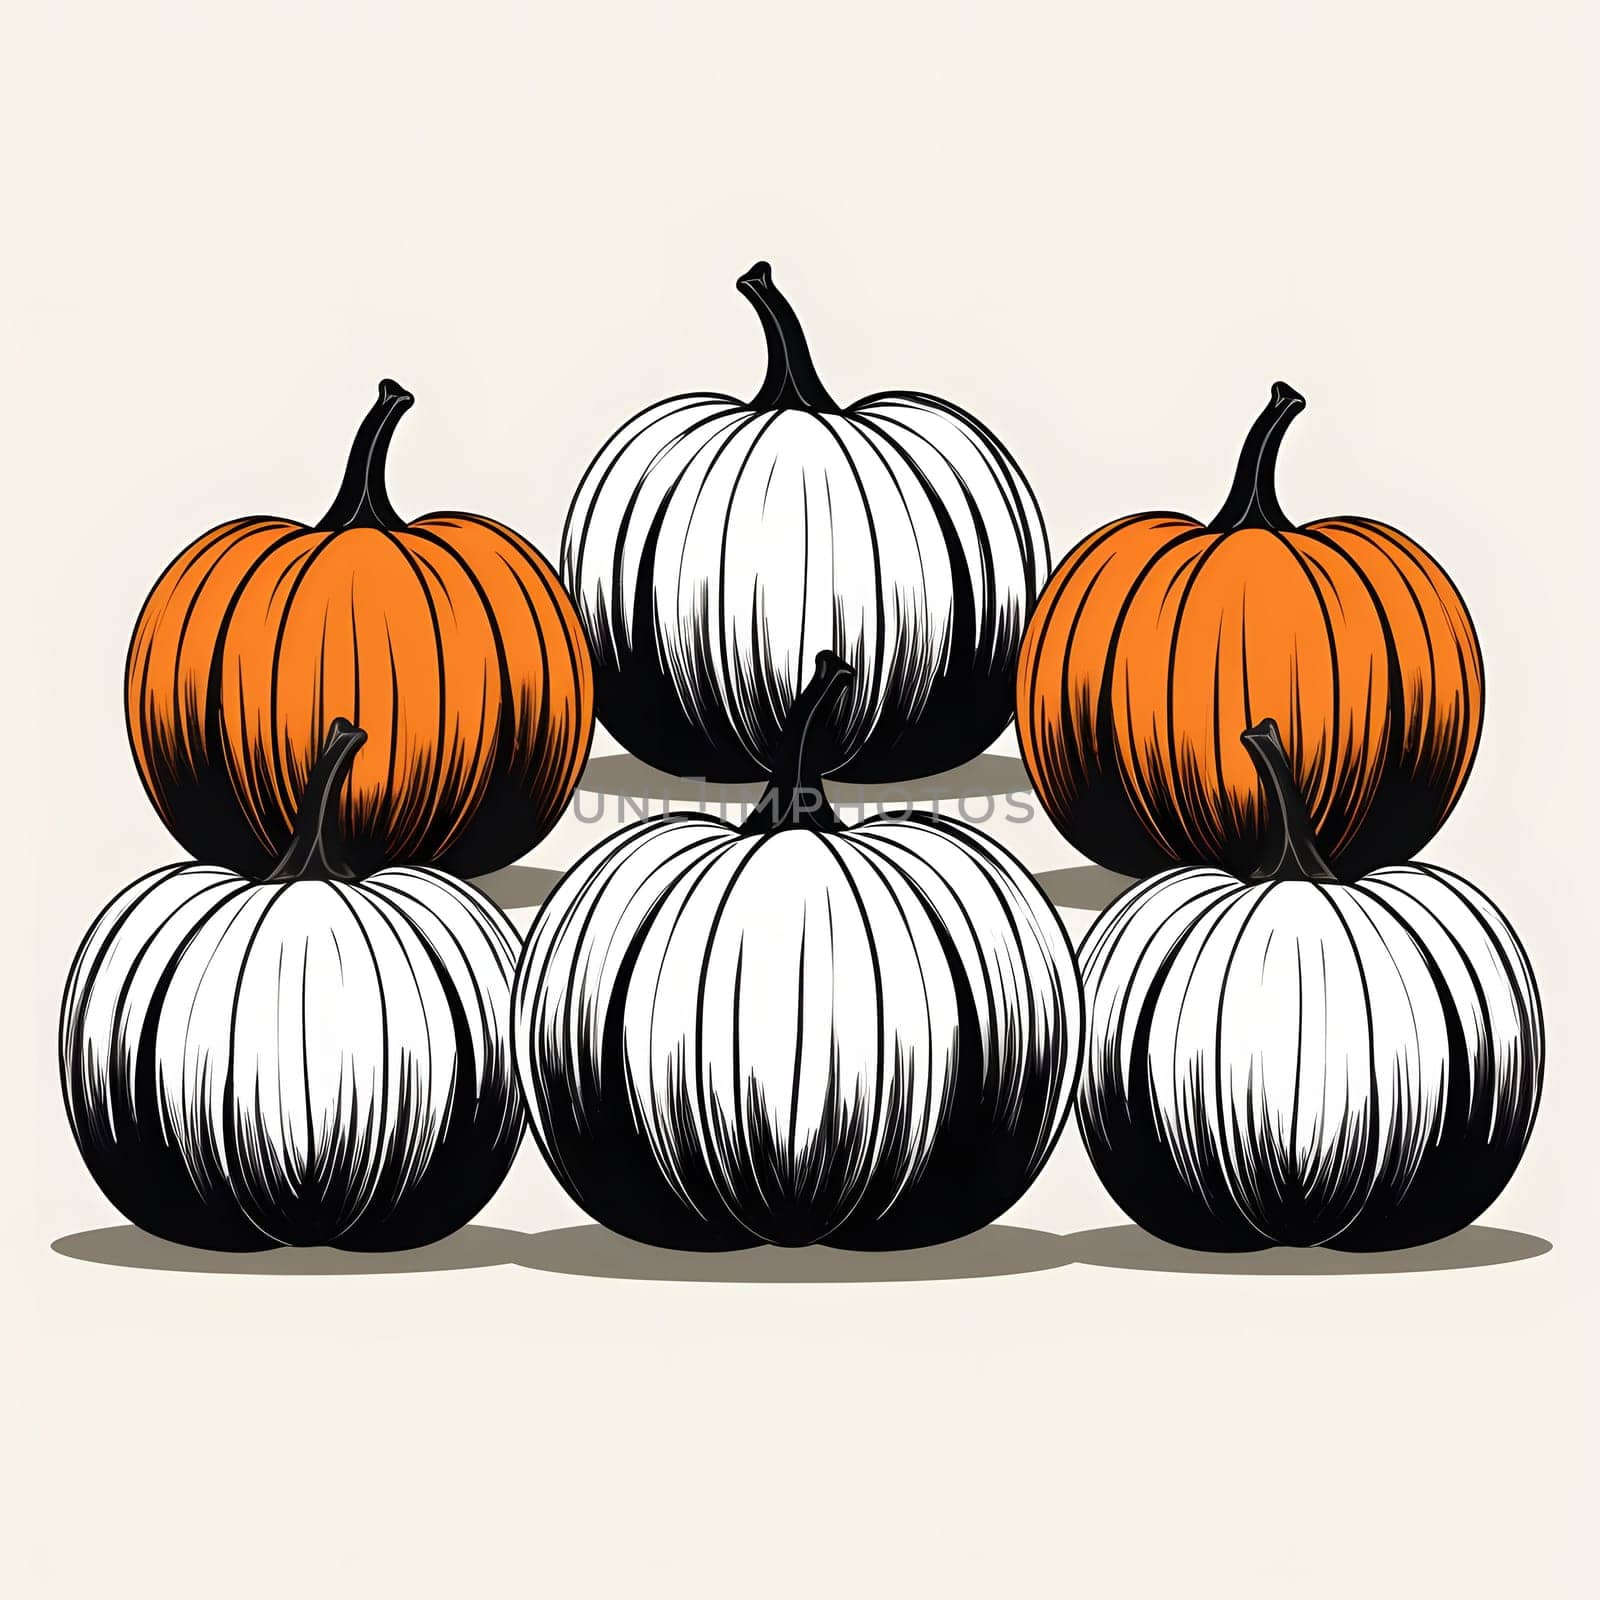 Black and white and colorful pumpkins. Pumpkin as a dish of thanksgiving for the harvest, picture on a white isolated background. by ThemesS